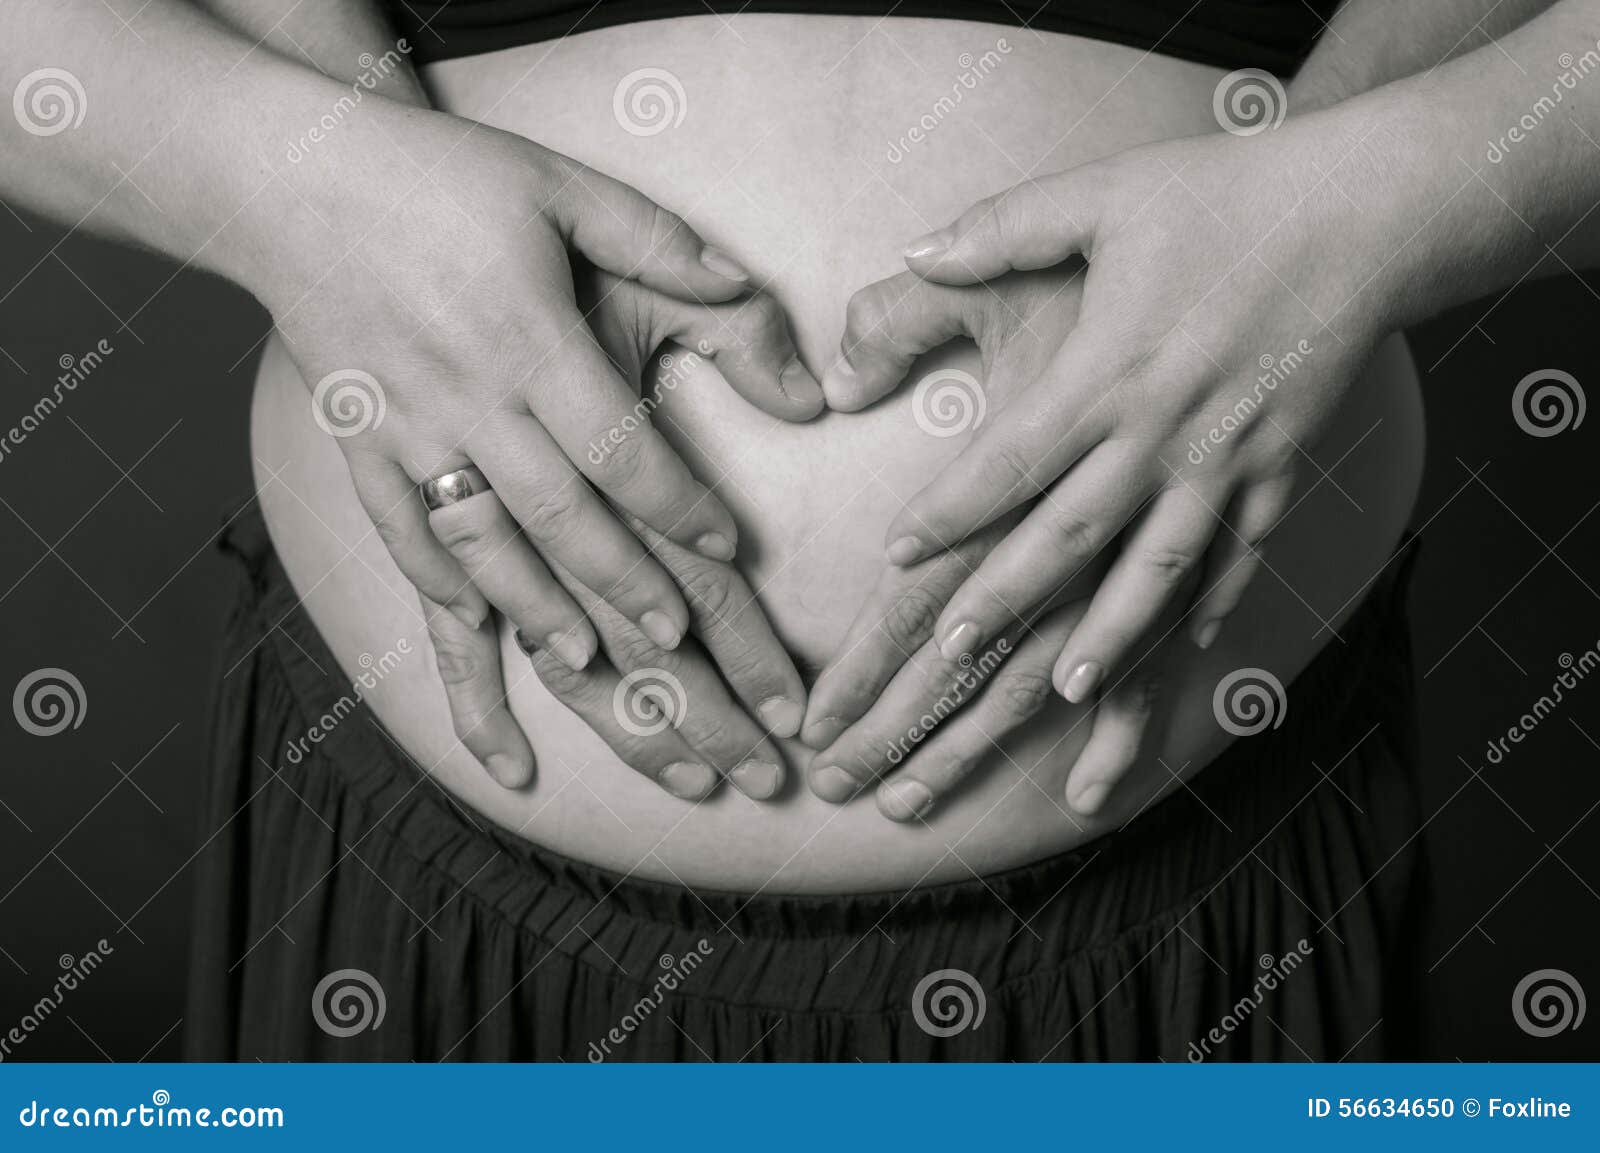 Hands of Men and Women on Pregnant Belly Stock Photo - Image of ...